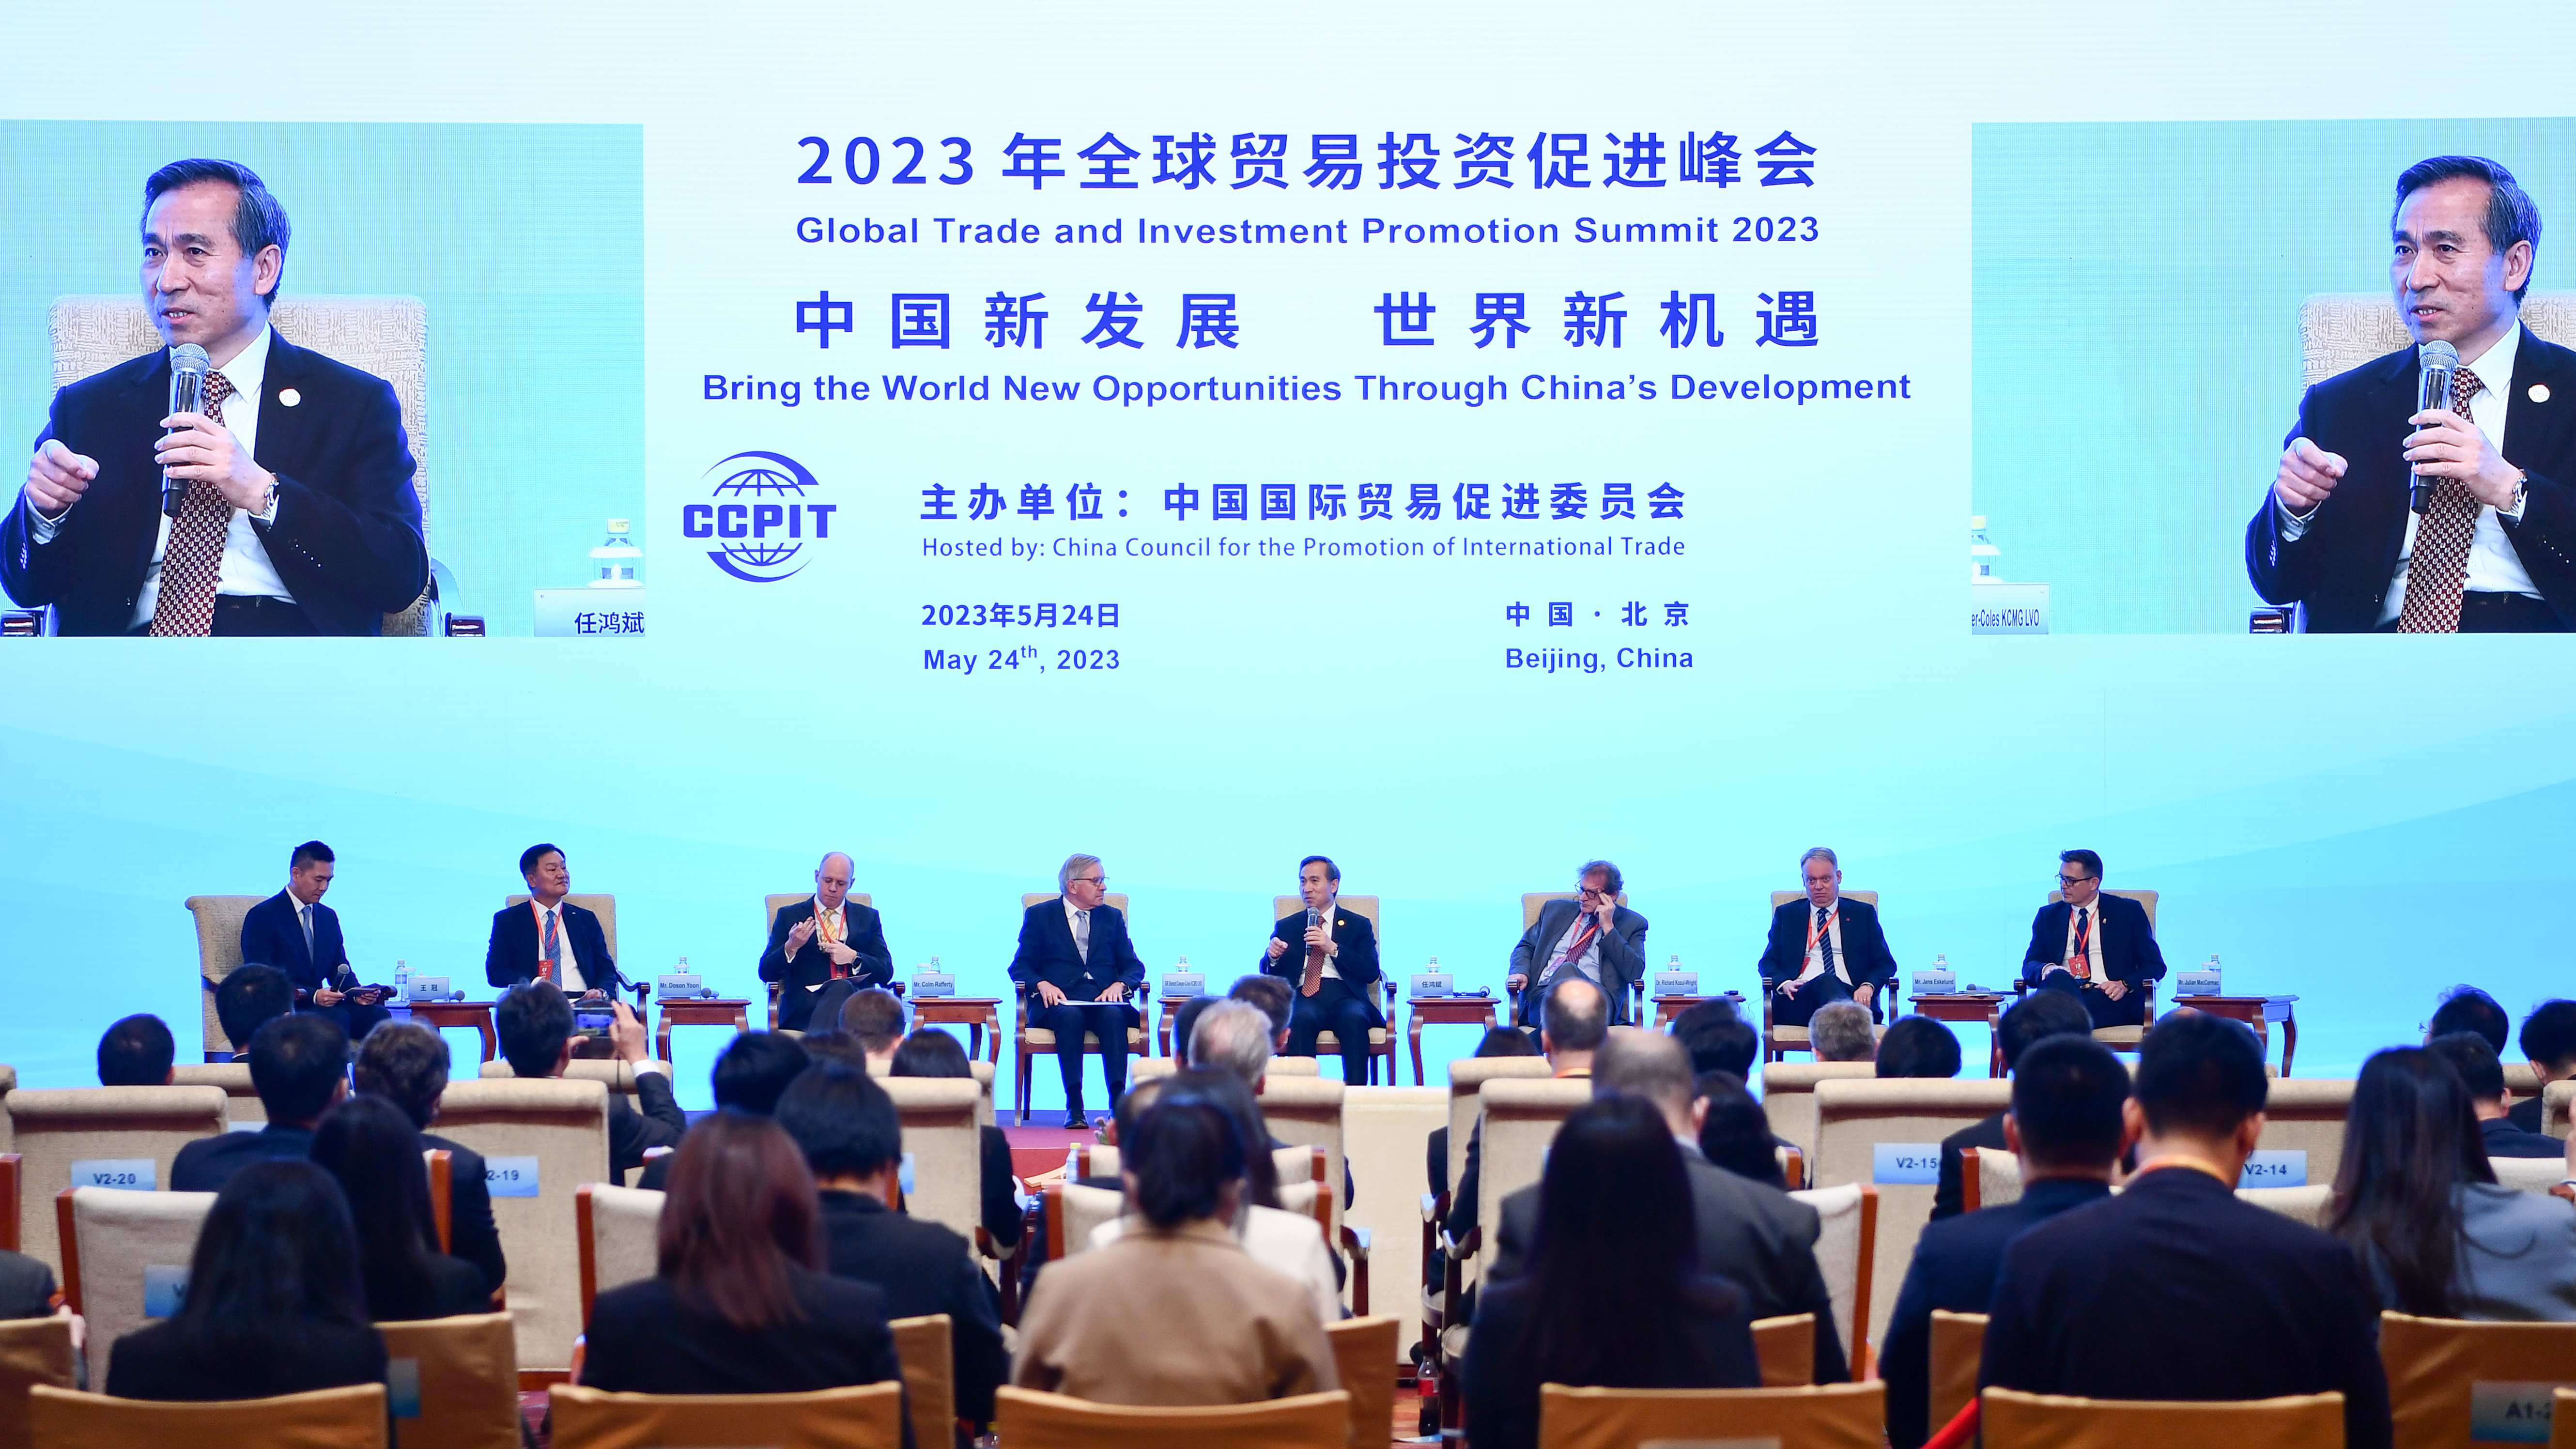 The Global Trade and Investment Promotion Summit 2023, Beijing, China, May 24, 2023. /CCPIT 